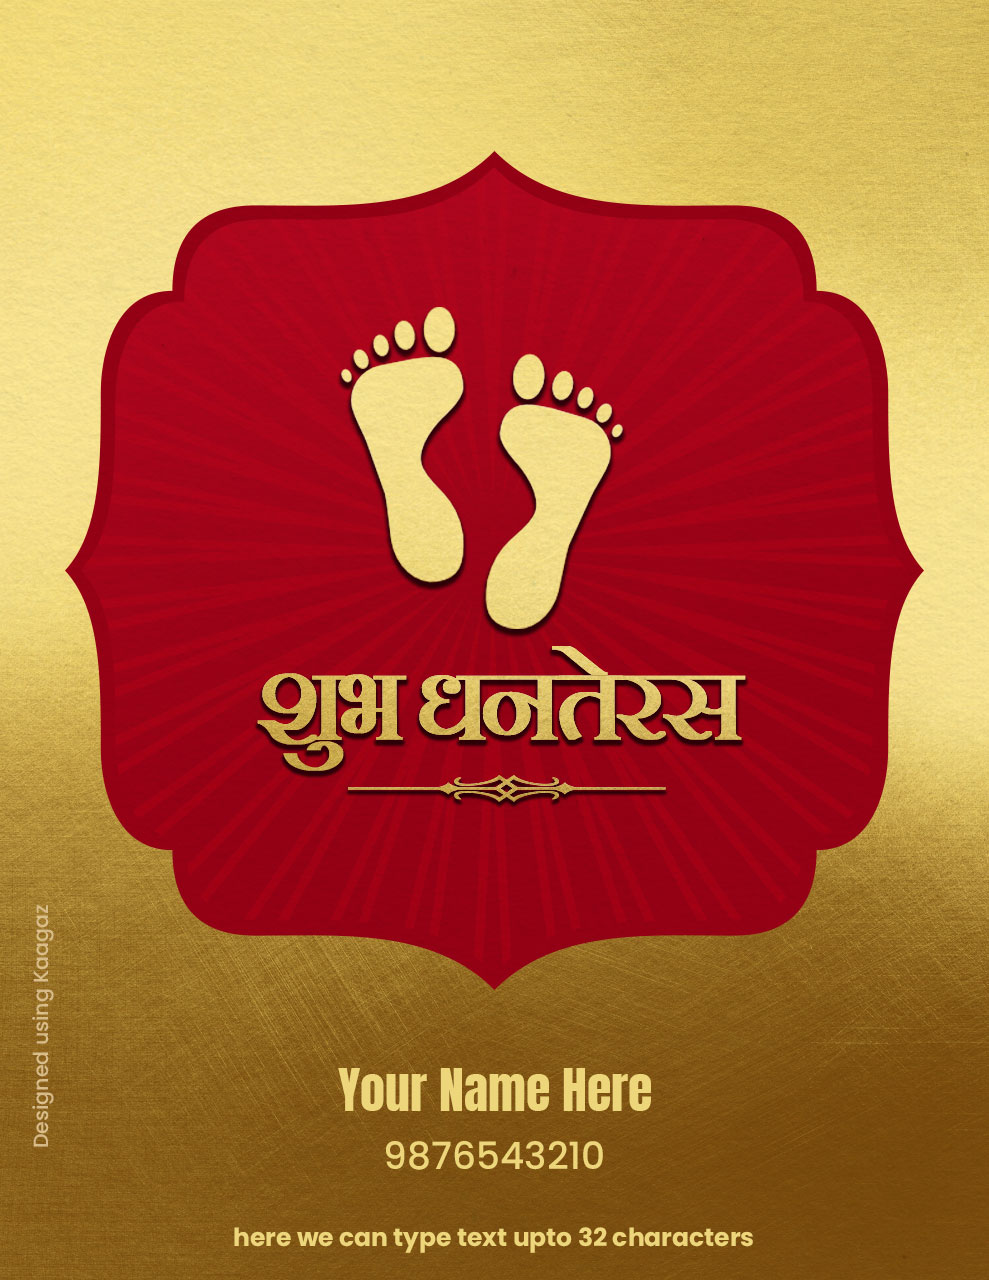 Warm wishes to you & your family on the auspicious occasion of Dhanteras